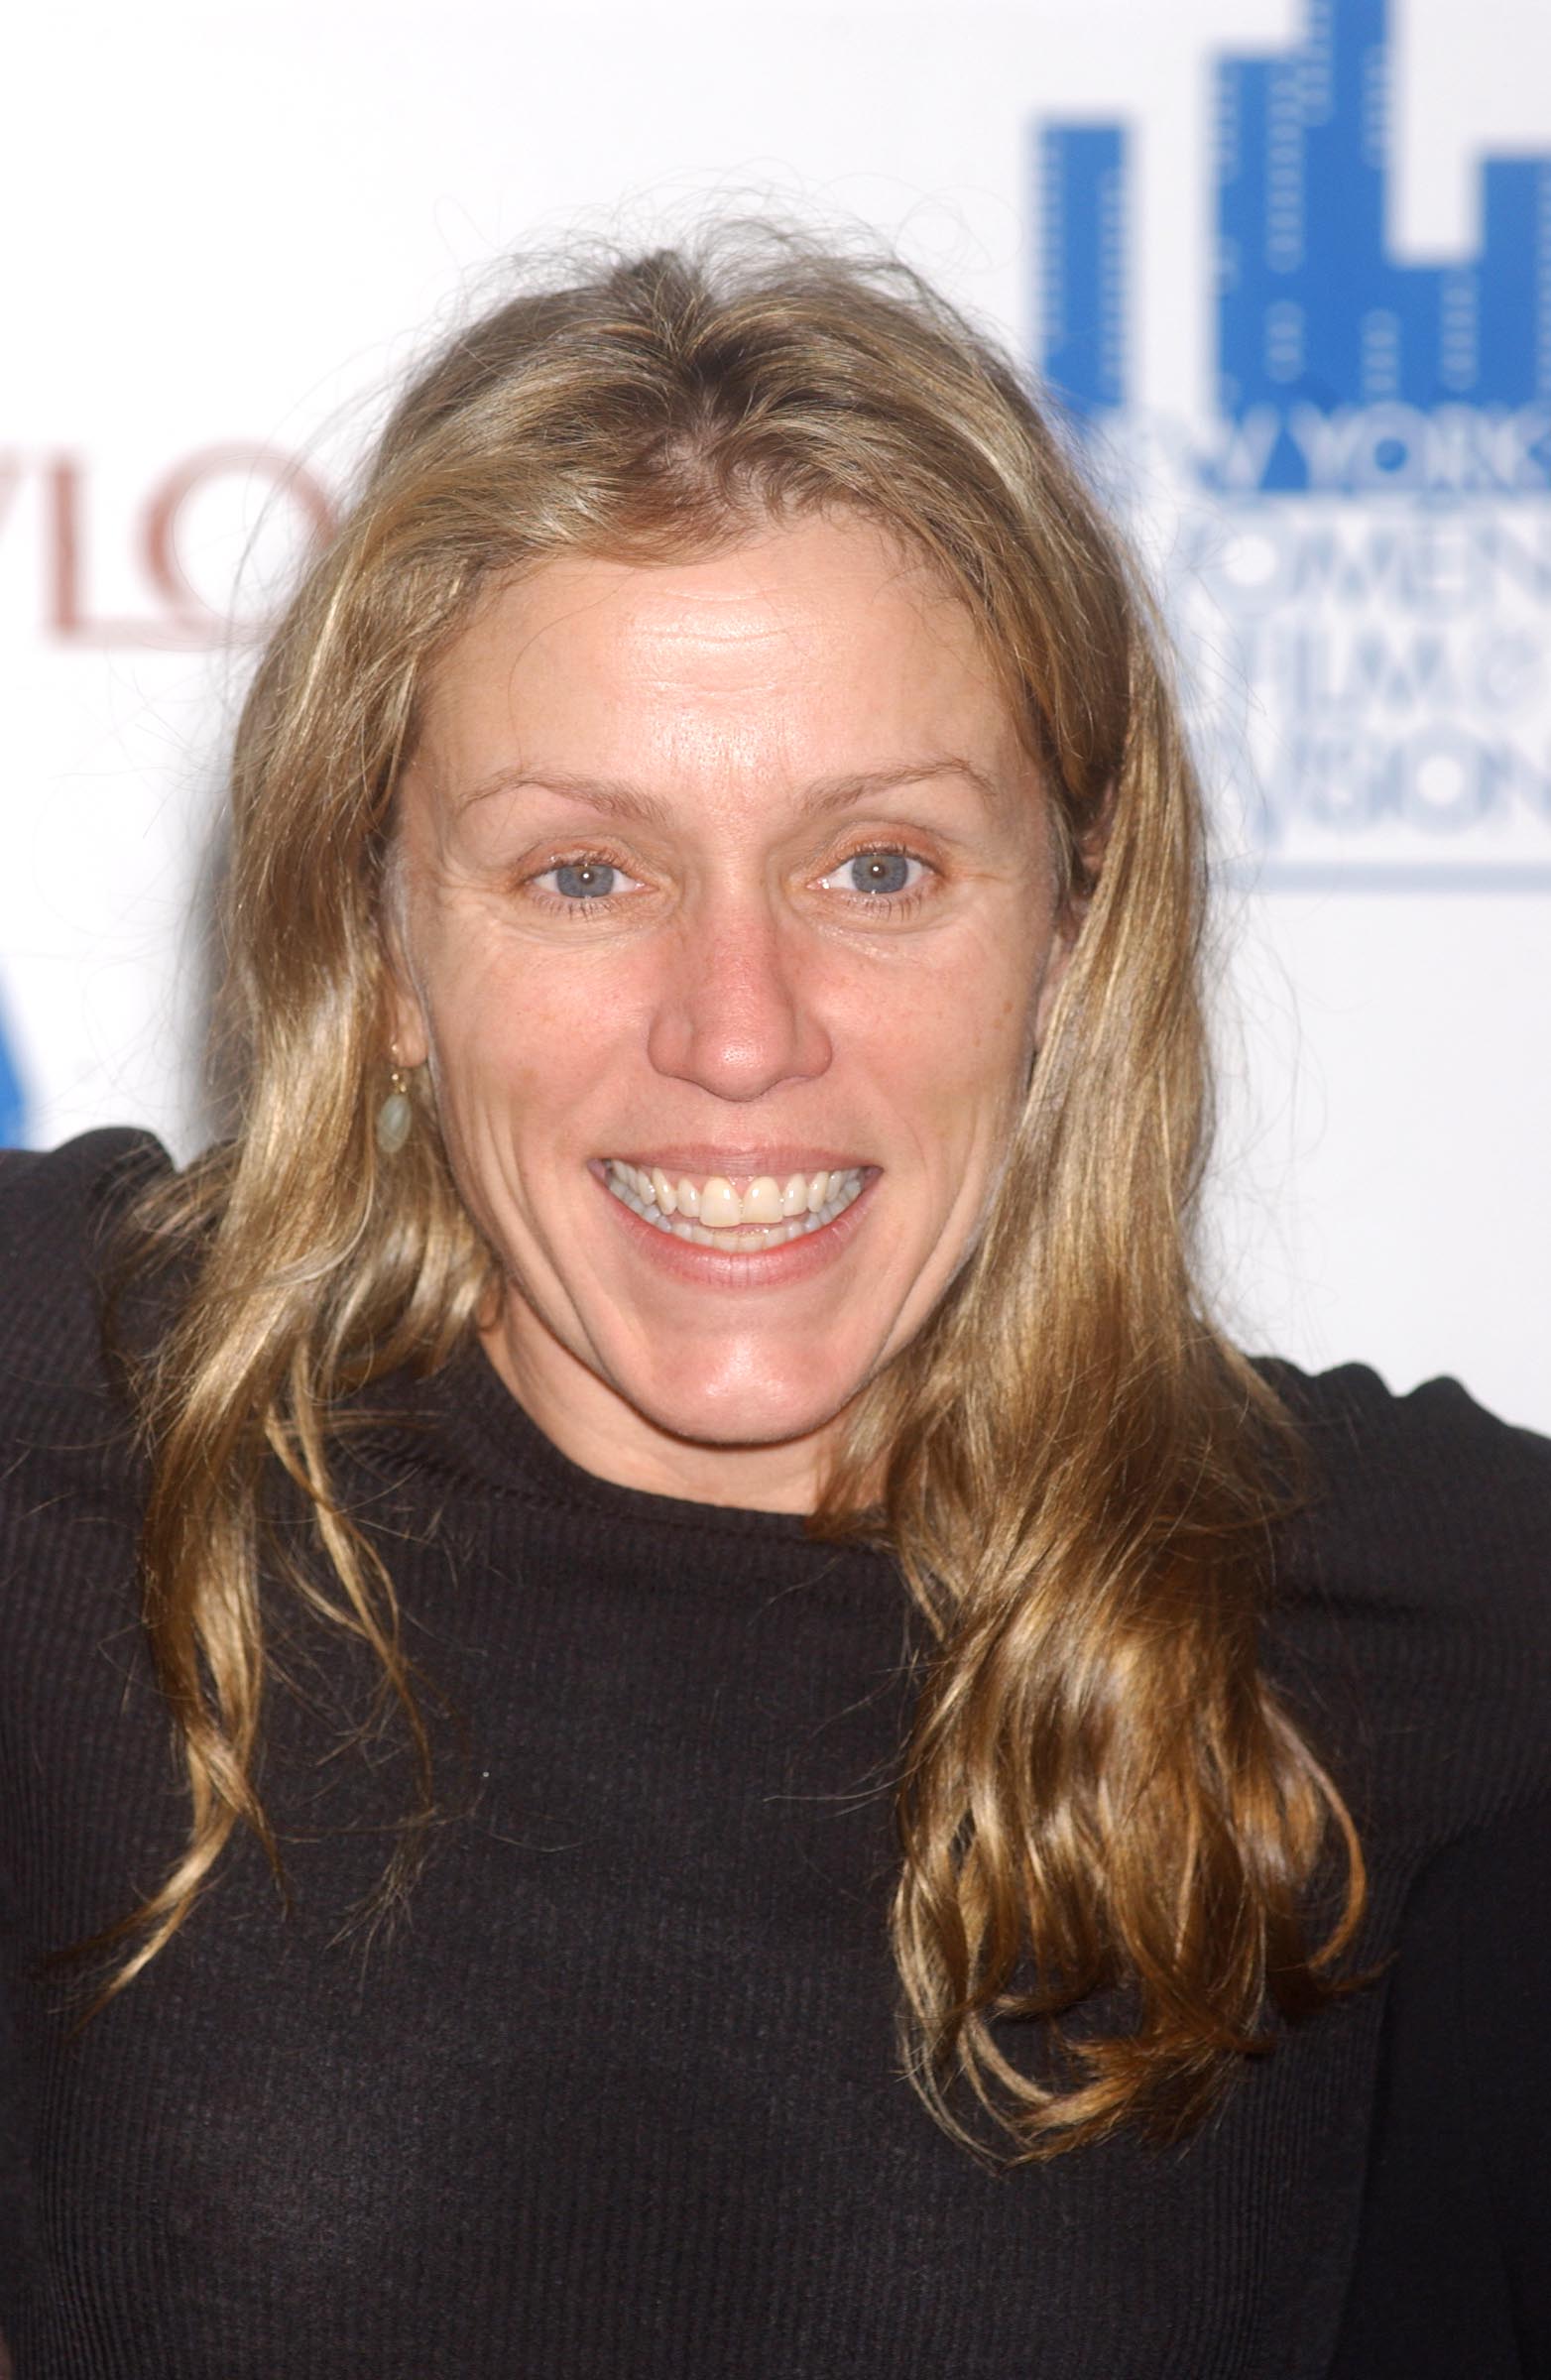 Pictures of Frances McDormand, Picture #244345 - Pictures Of Celebrities1564 x 2400